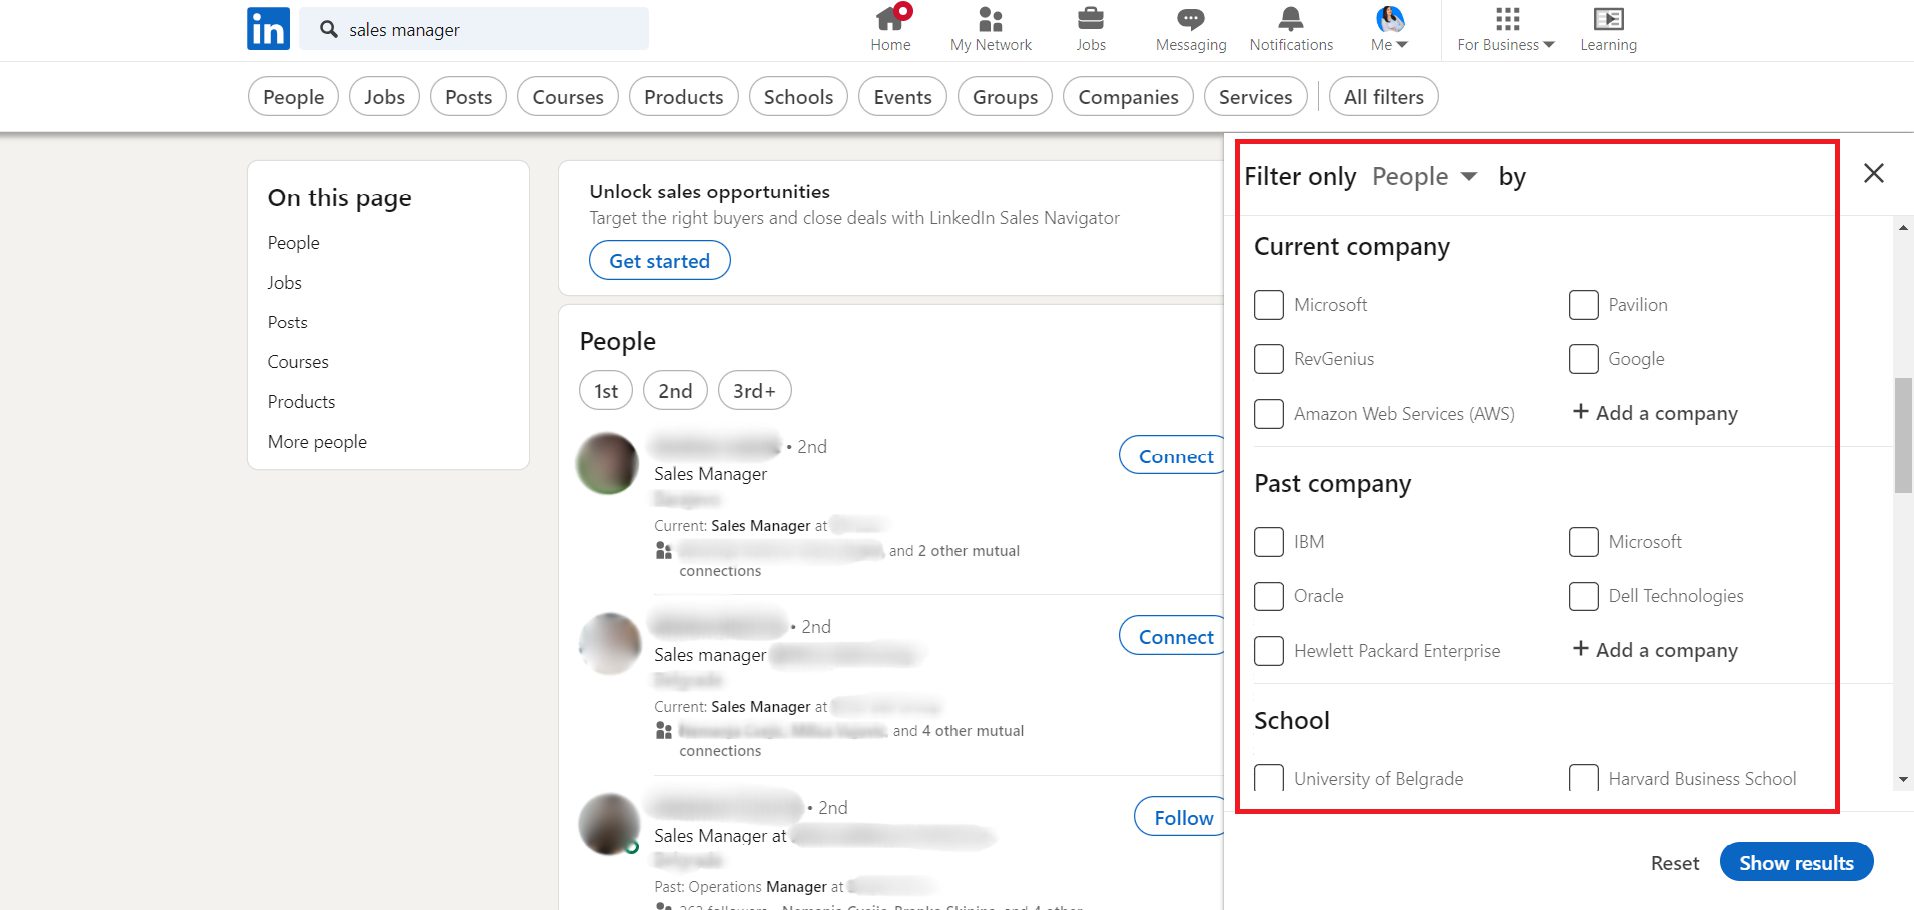 An expanded view of all filters on LinkedIn